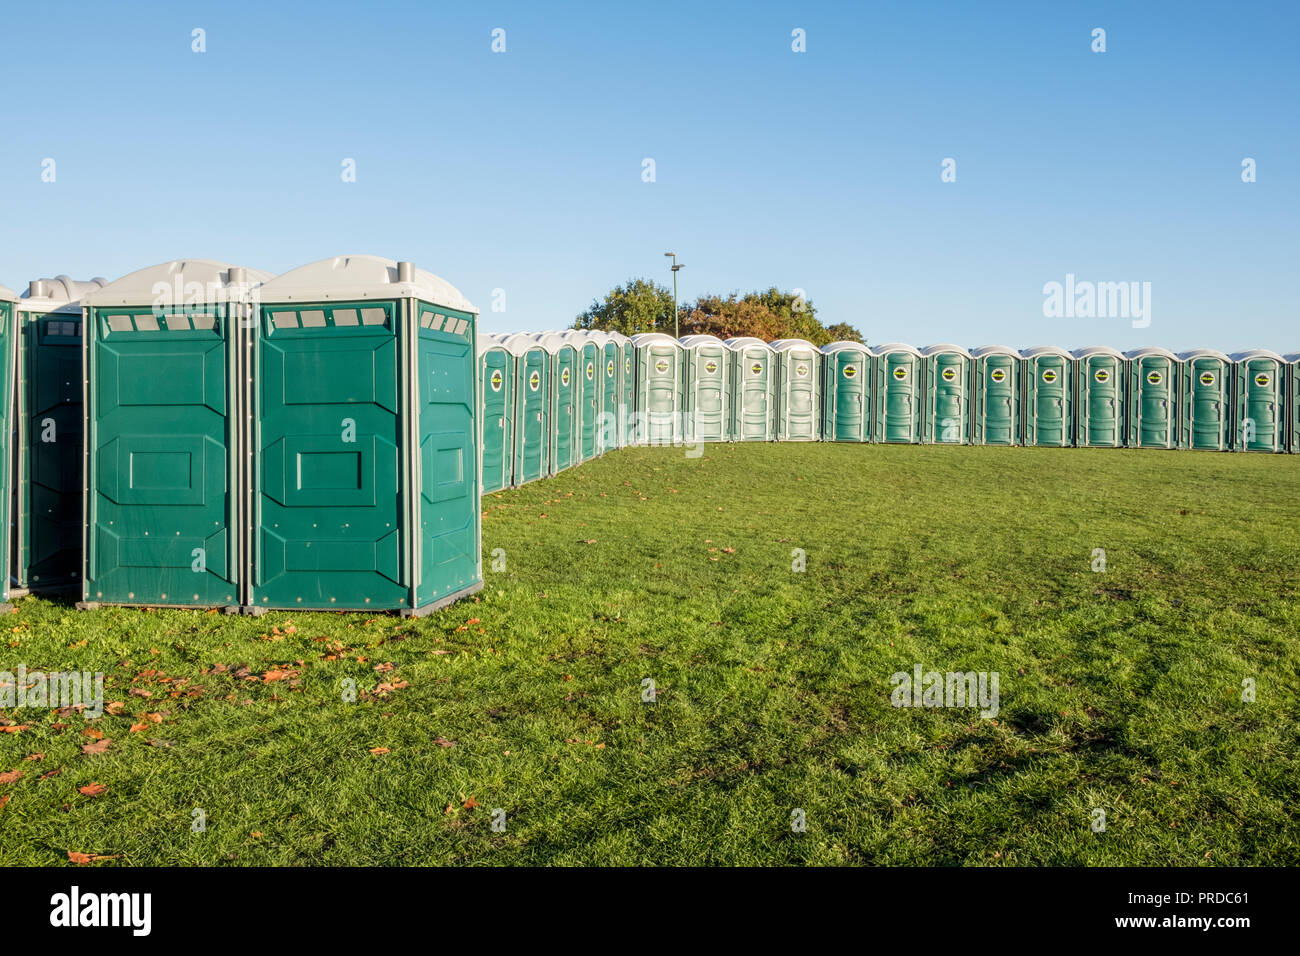 A line of temporary toilet cubicles. Lots of portable toilets in a field, Nottingham, England, UK Stock Photo